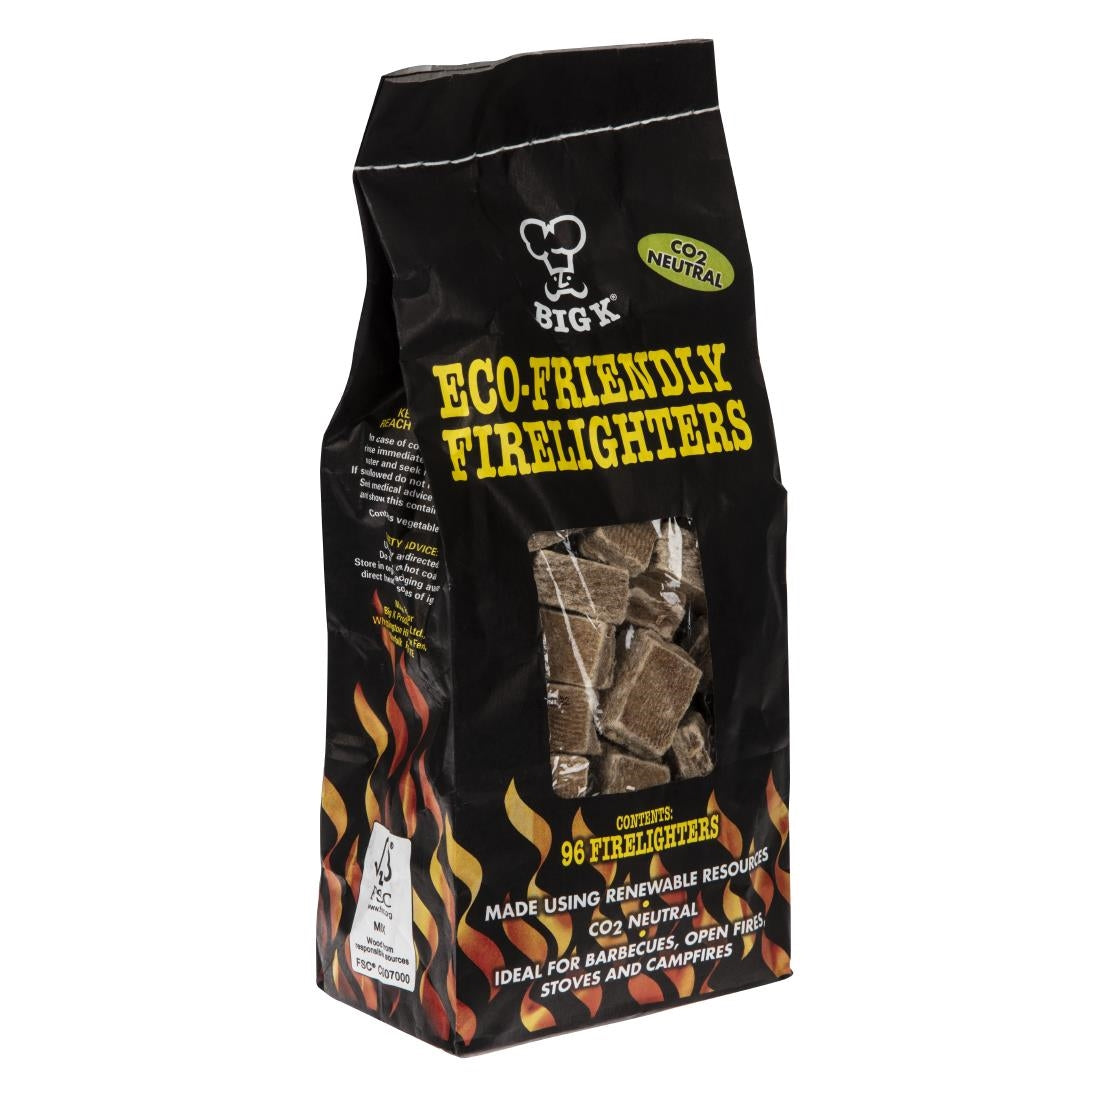 Big K Eco-Friendly Firelighters (Pack of 96) FL96 JD Catering Equipment Solutions Ltd